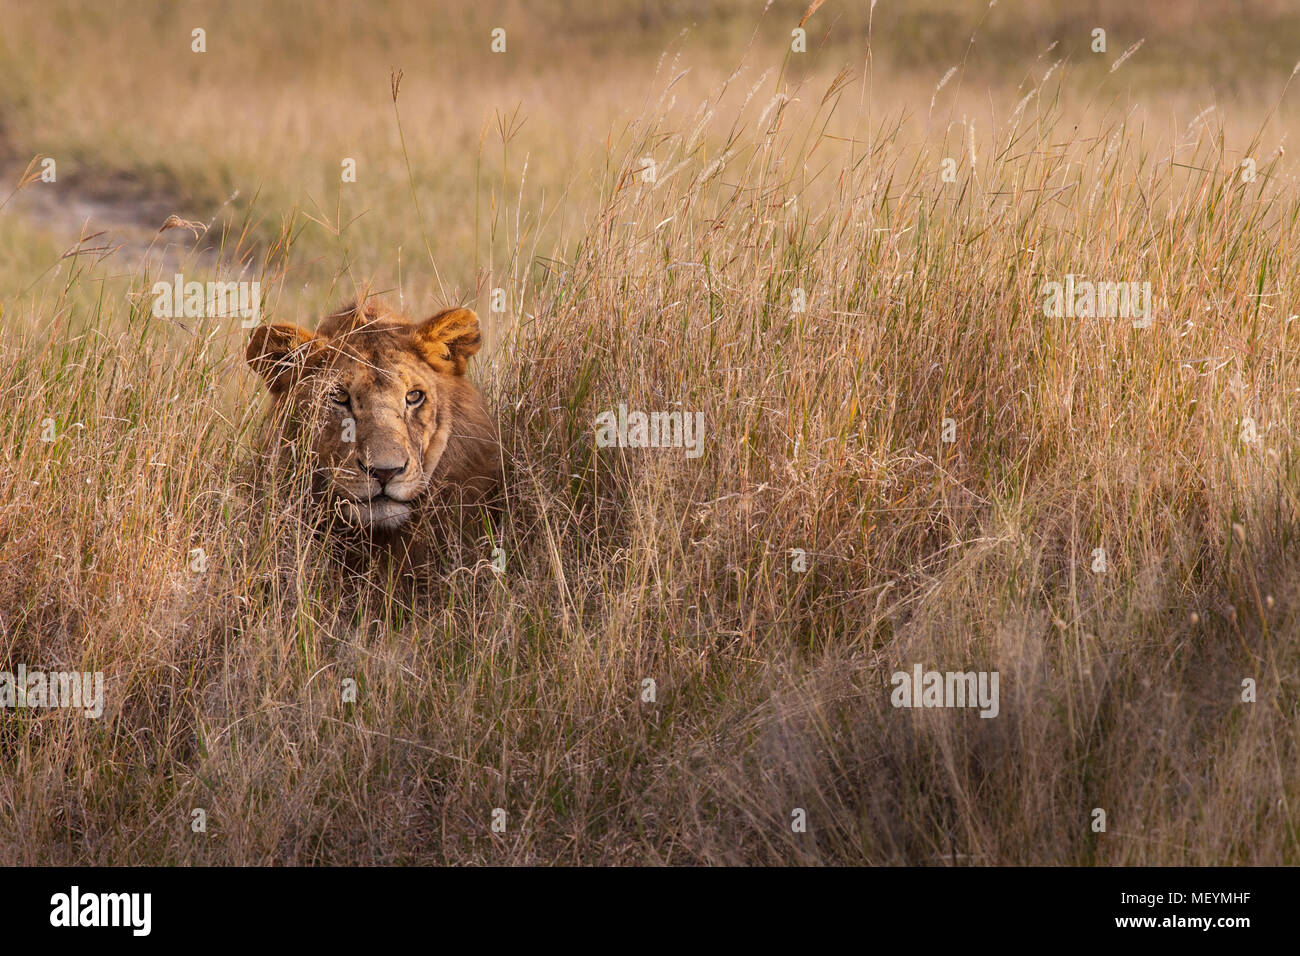 Young male lion hides in grass, Serengeti National Park, Tanzania; across Africa lion population is diminishing due to habit loss and human interactio Stock Photo